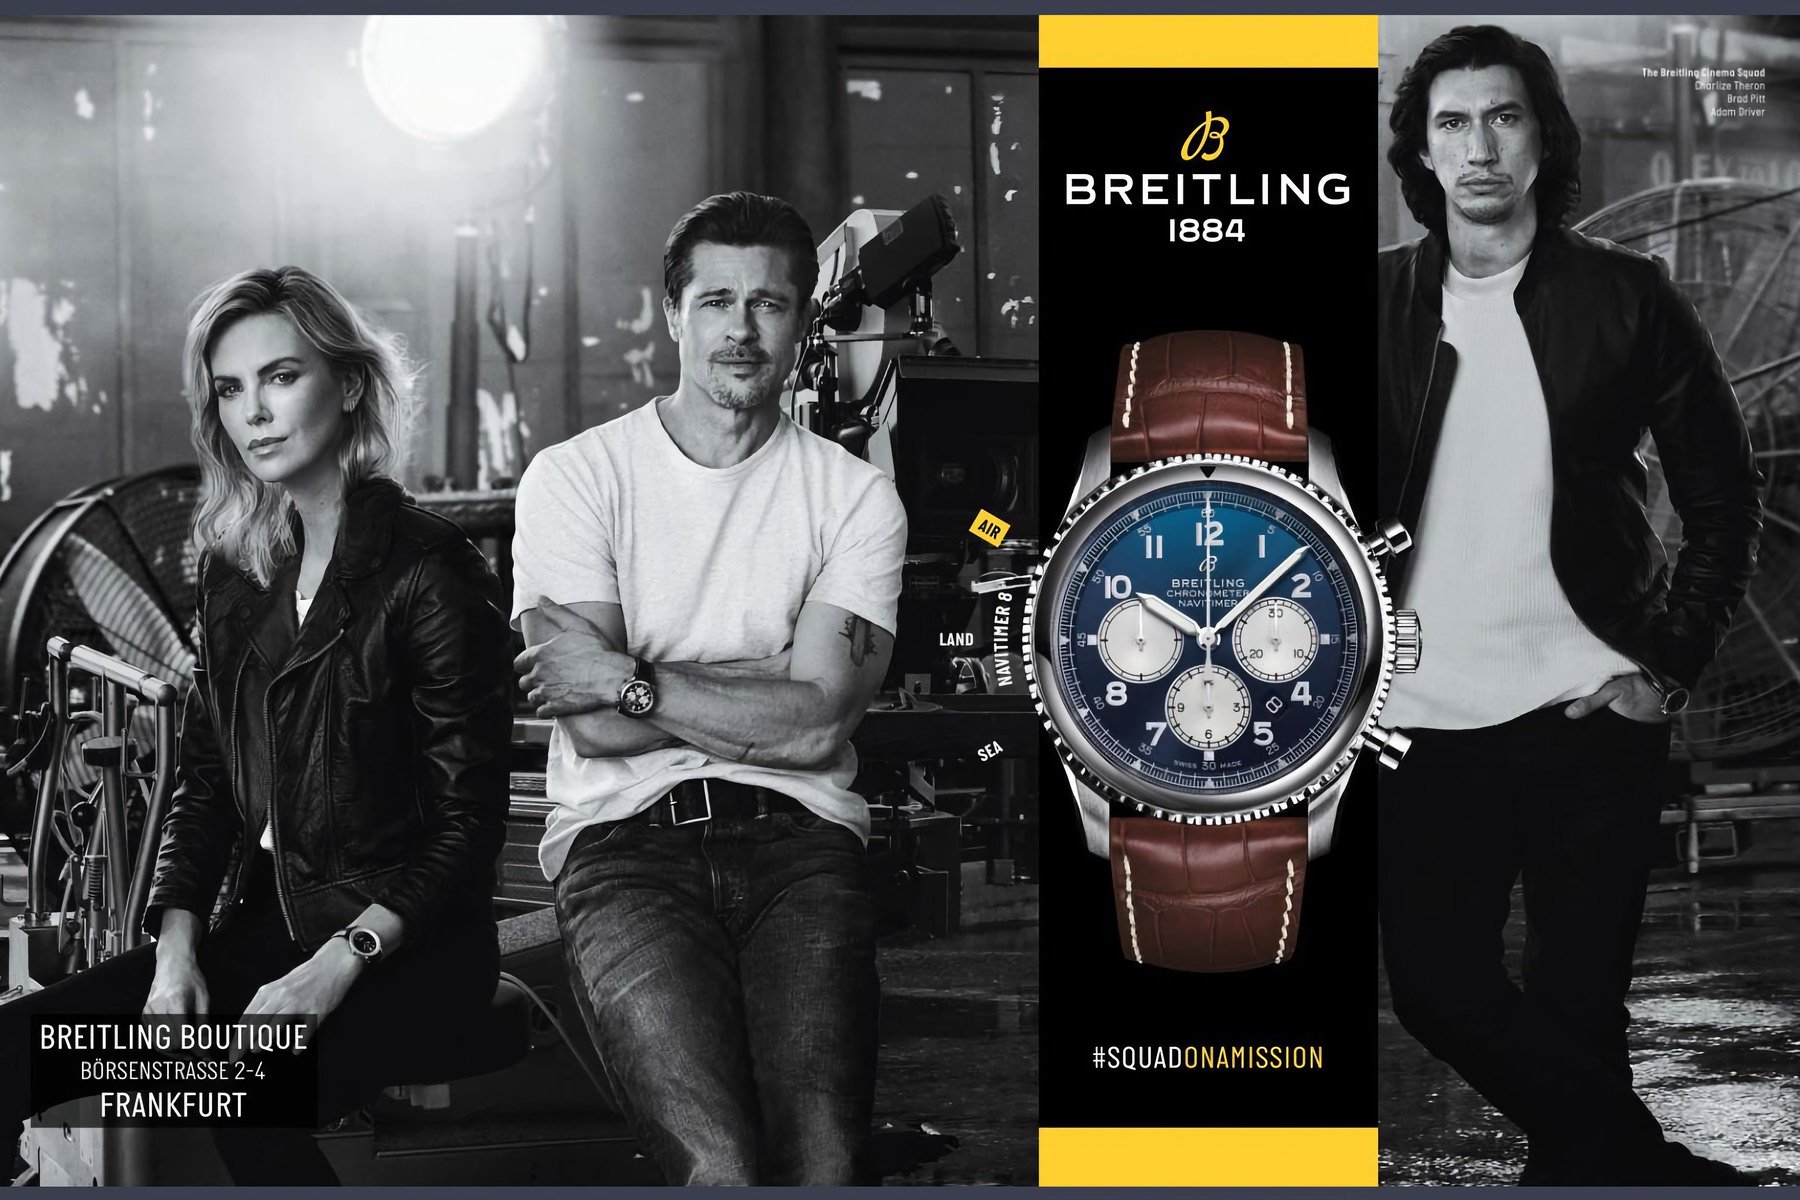 Celebrity Watch Brand Ambassadors: Are You Being Influenced?